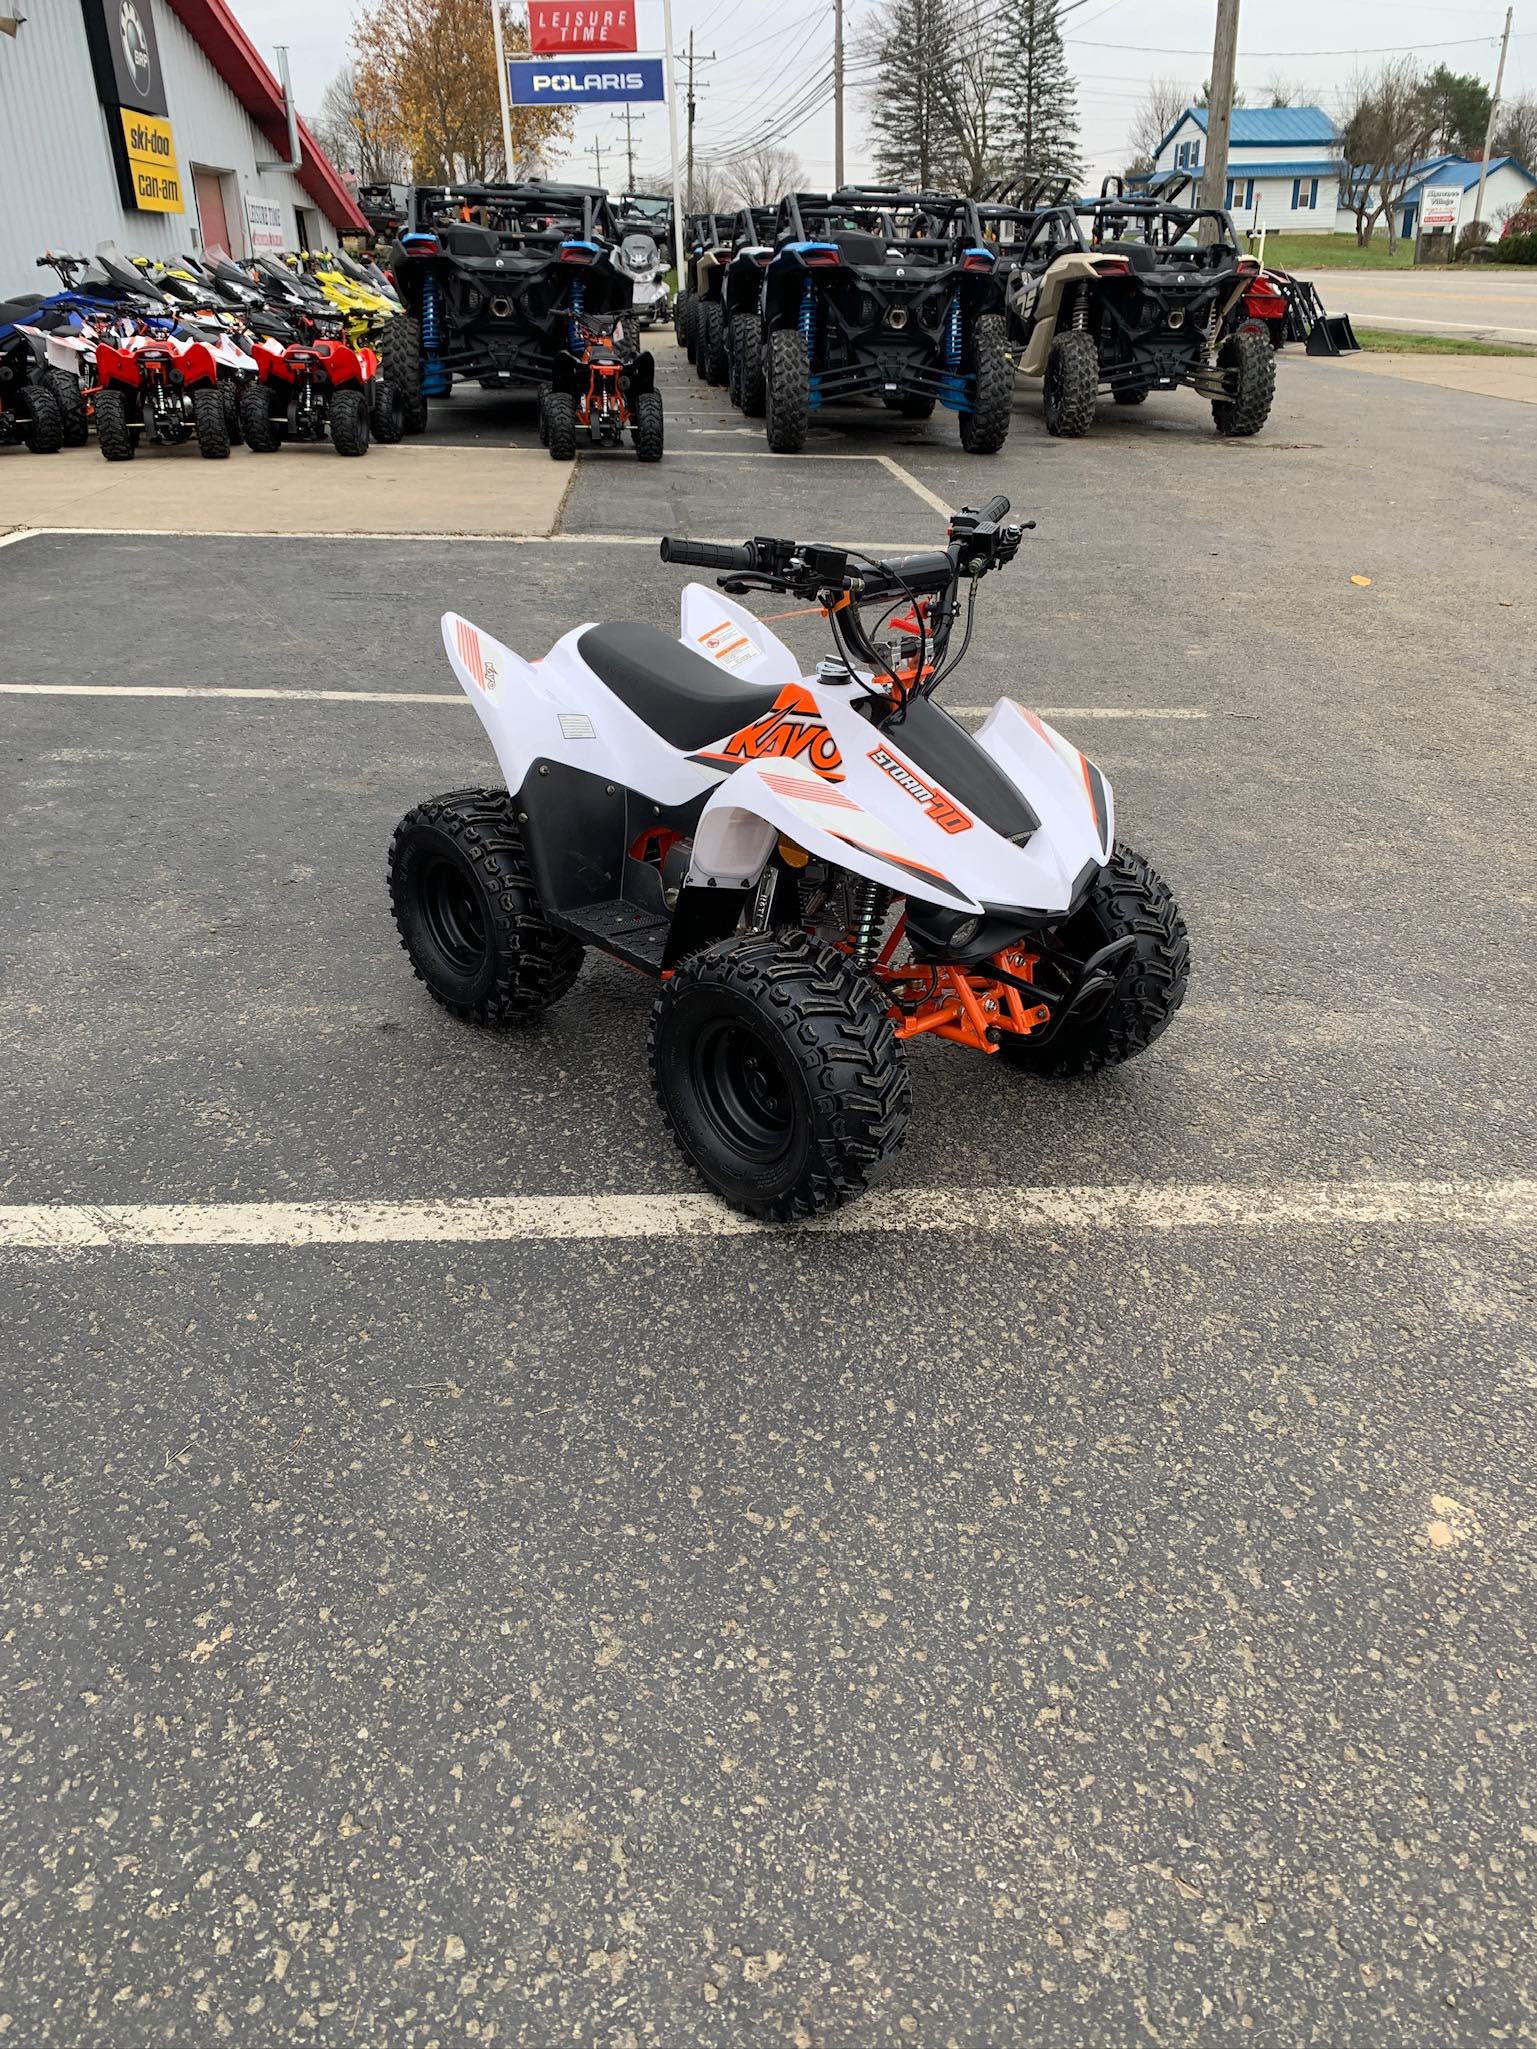 2023 Kayo Fox 70 at Leisure Time Powersports of Corry